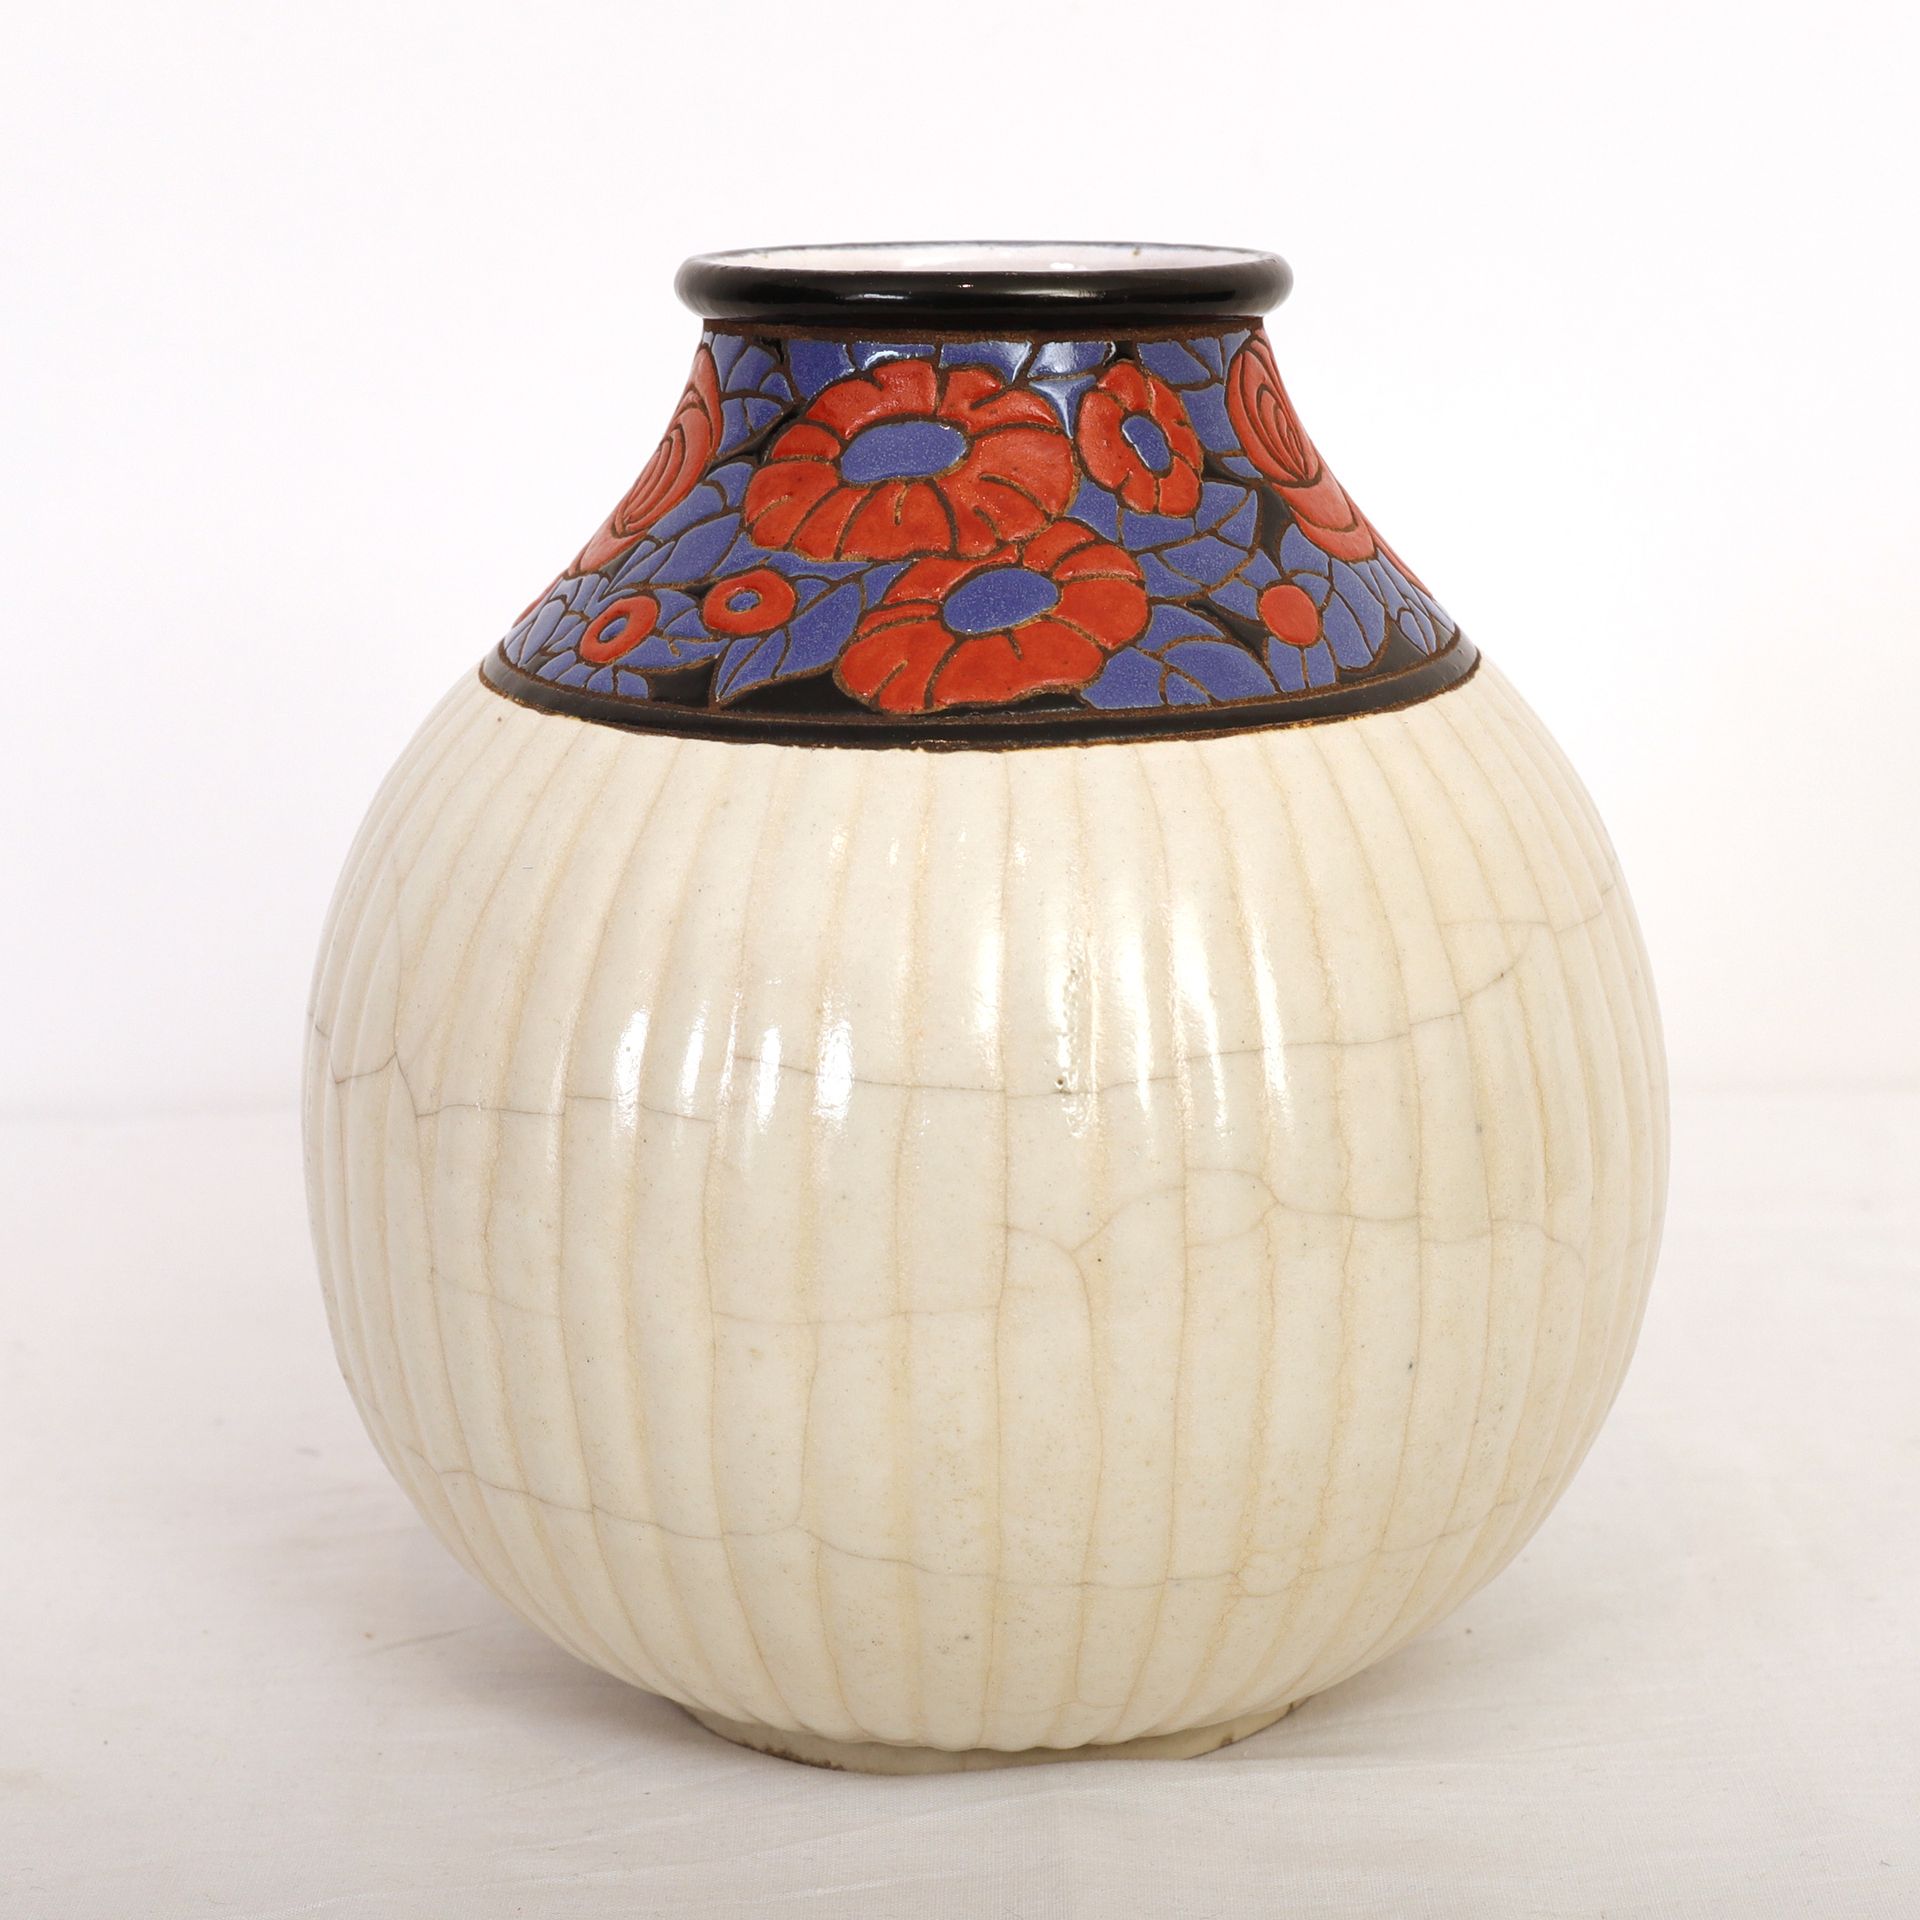 Null ART DECO CERAMIC BALL VASE

Decorated with a blue and red frieze of stylize&hellip;